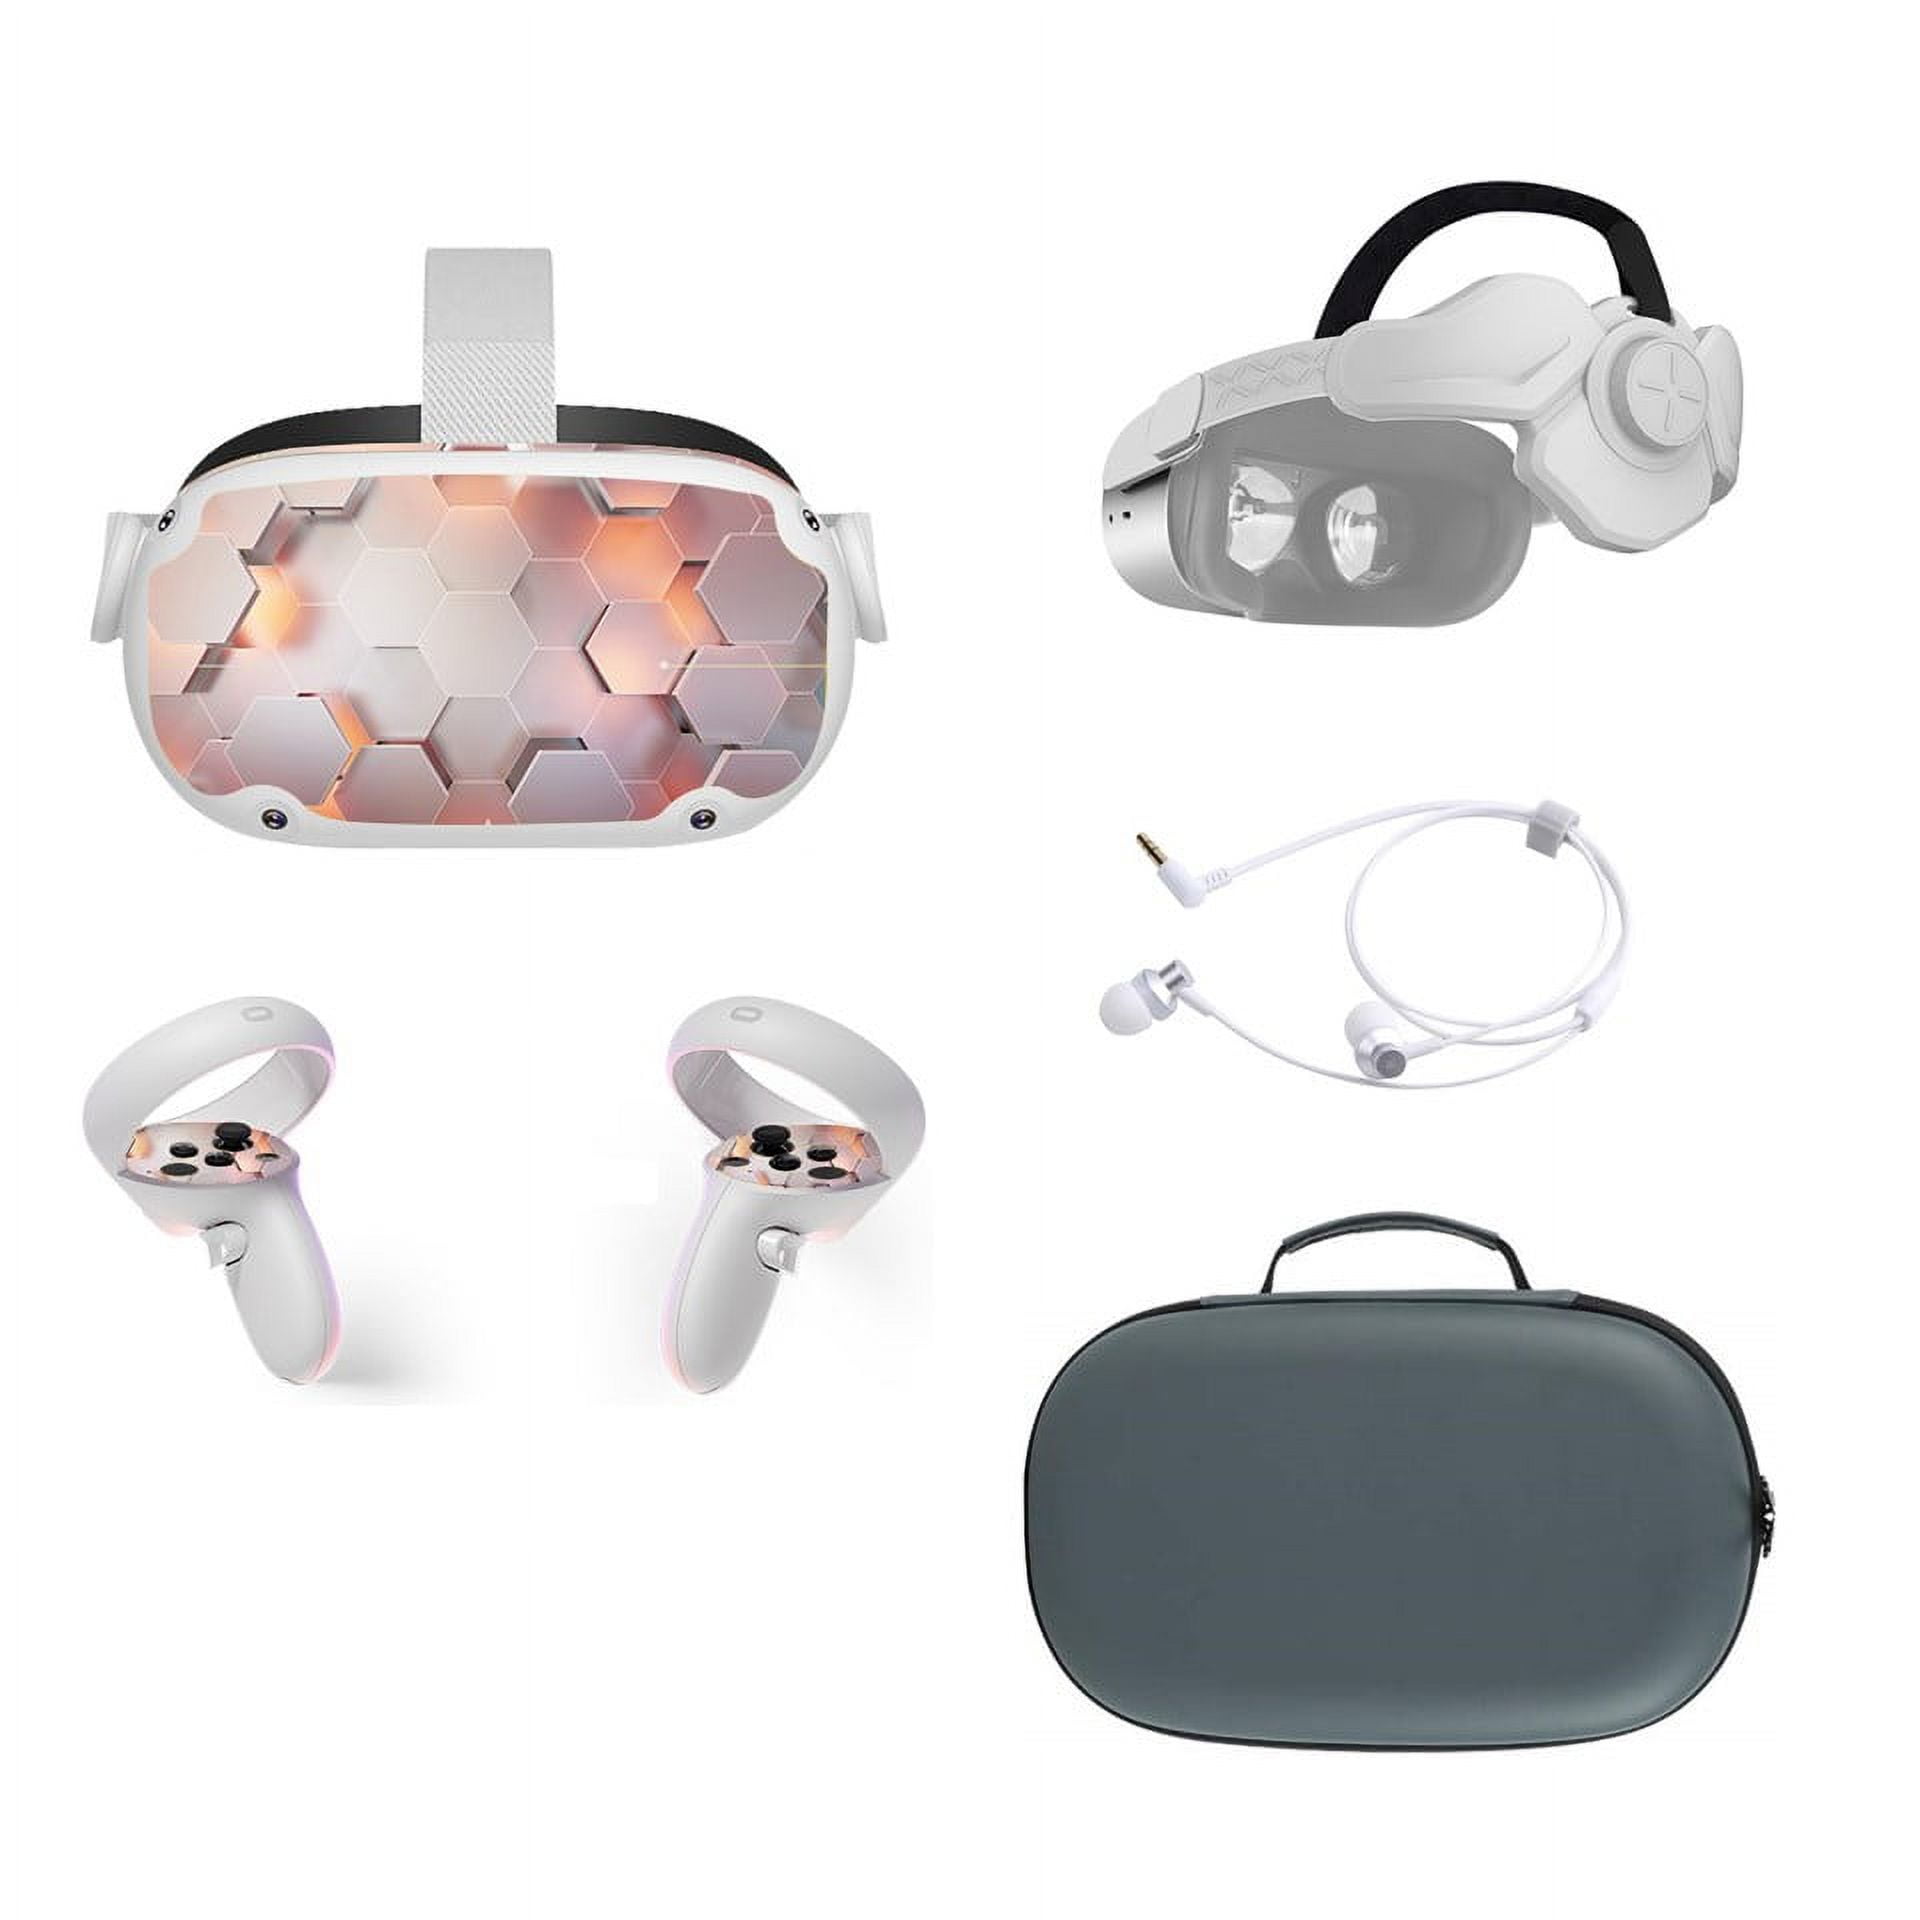 2022 Oculus Quest 2 All-In-One VR Headset, Touch Controllers